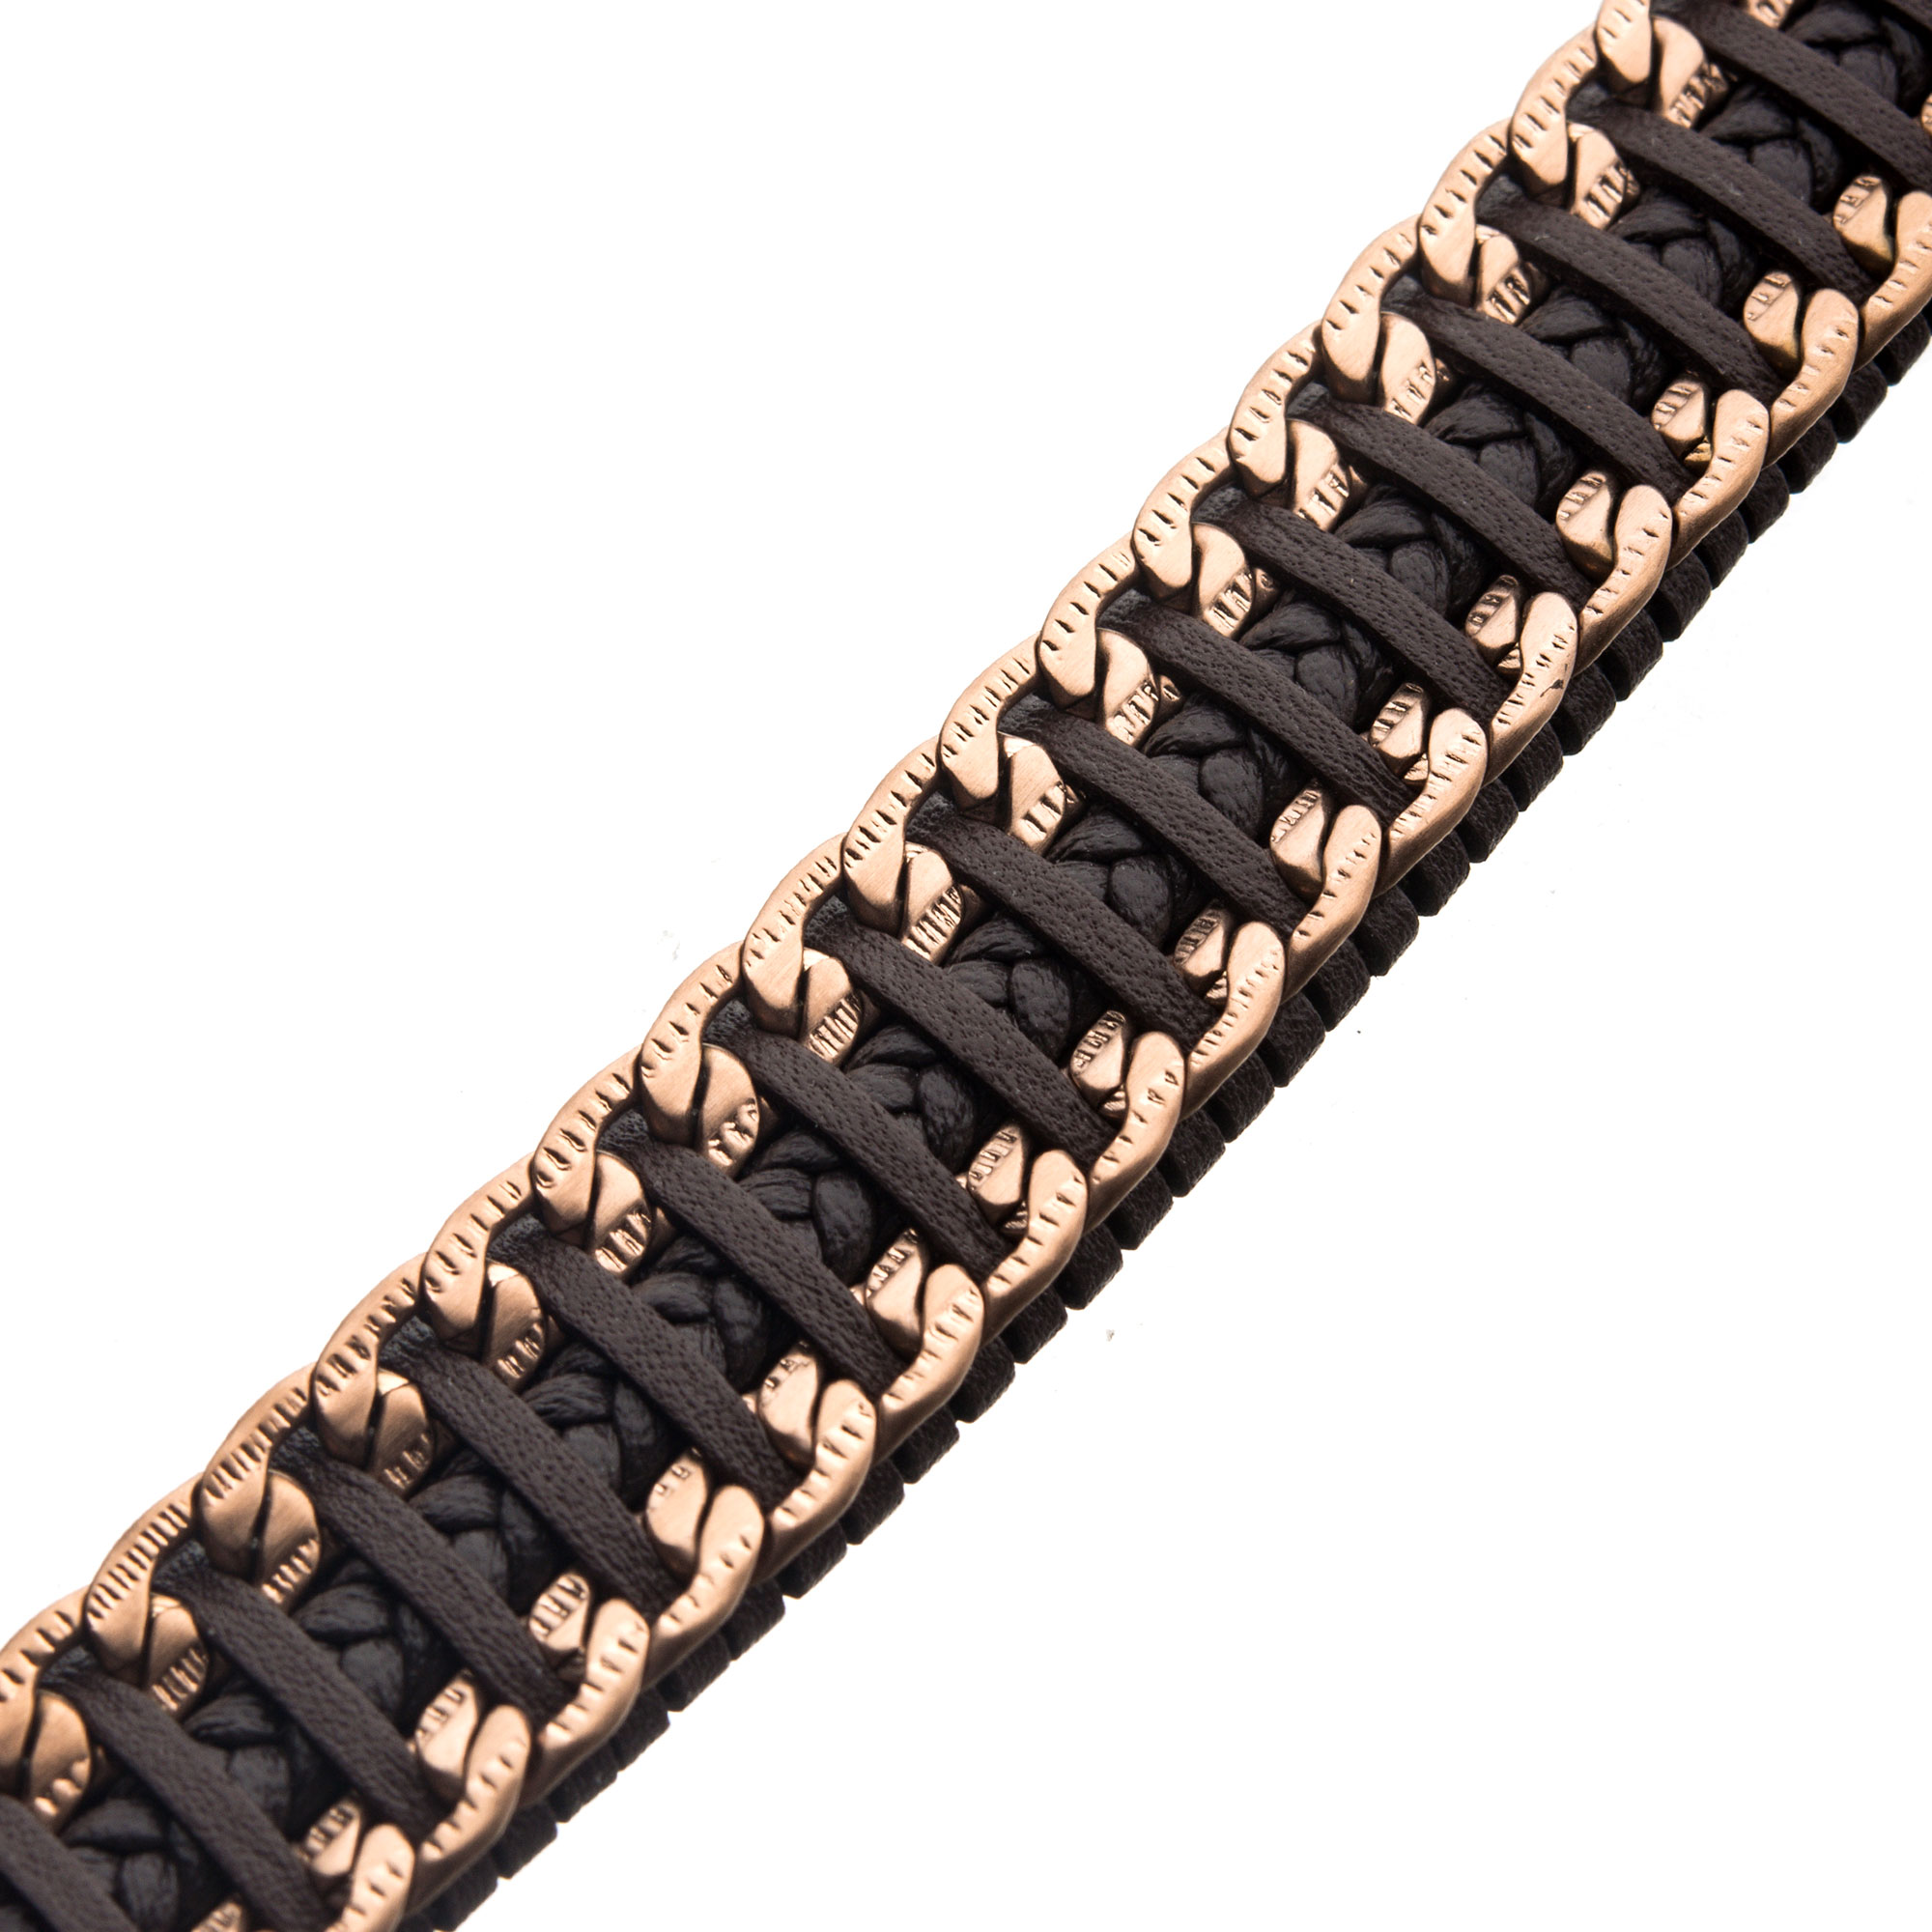 Brown & Black Weave Leather with Rose Gold Chain Bracelet Image 2 Midtown Diamonds Reno, NV